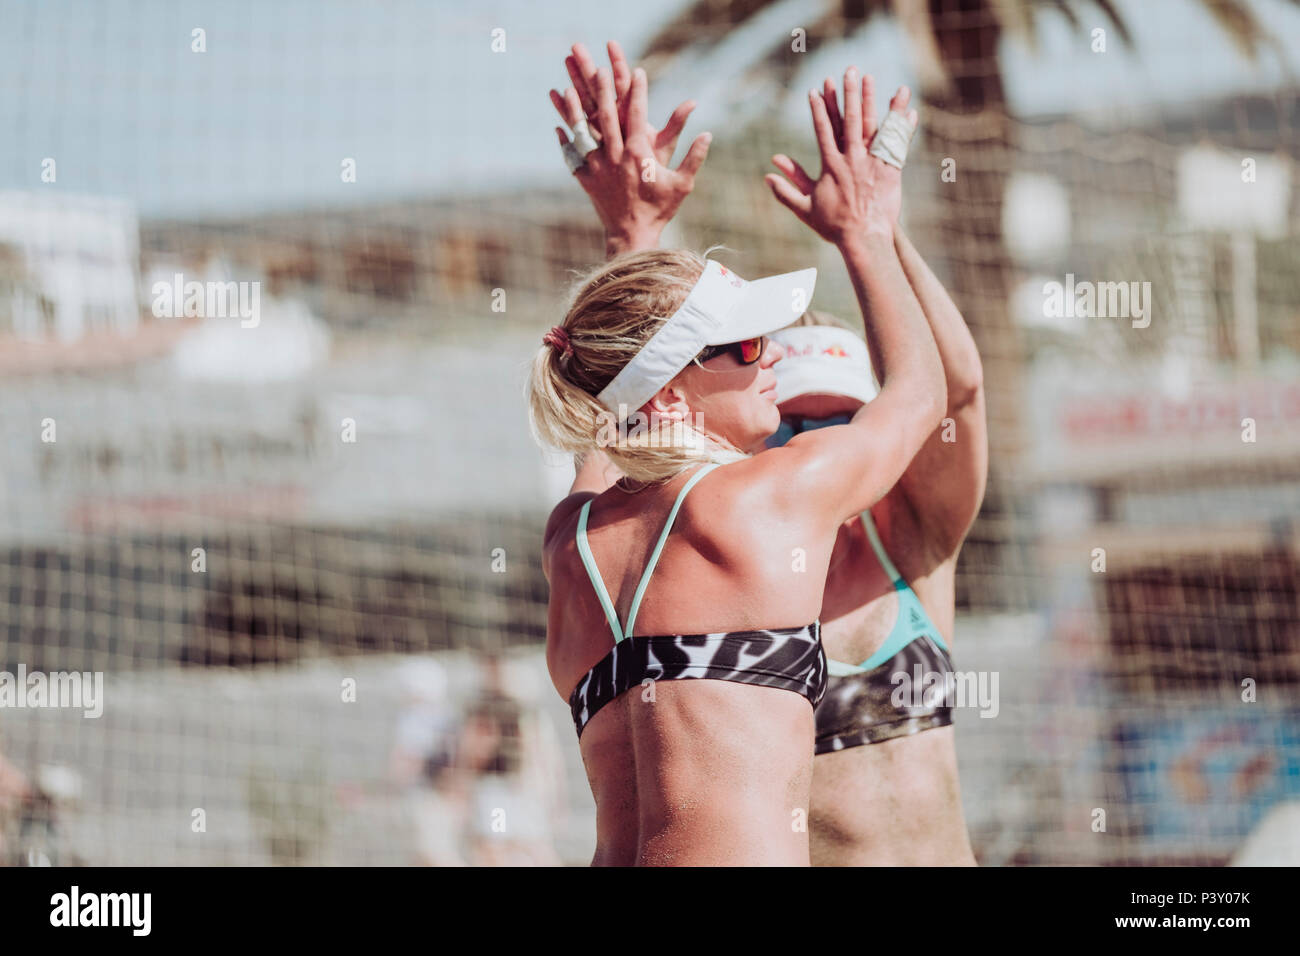 Beach Volley team, Maggie Kozuch, and Karla Borger, celebrate a point during a friendly match Stock Photo